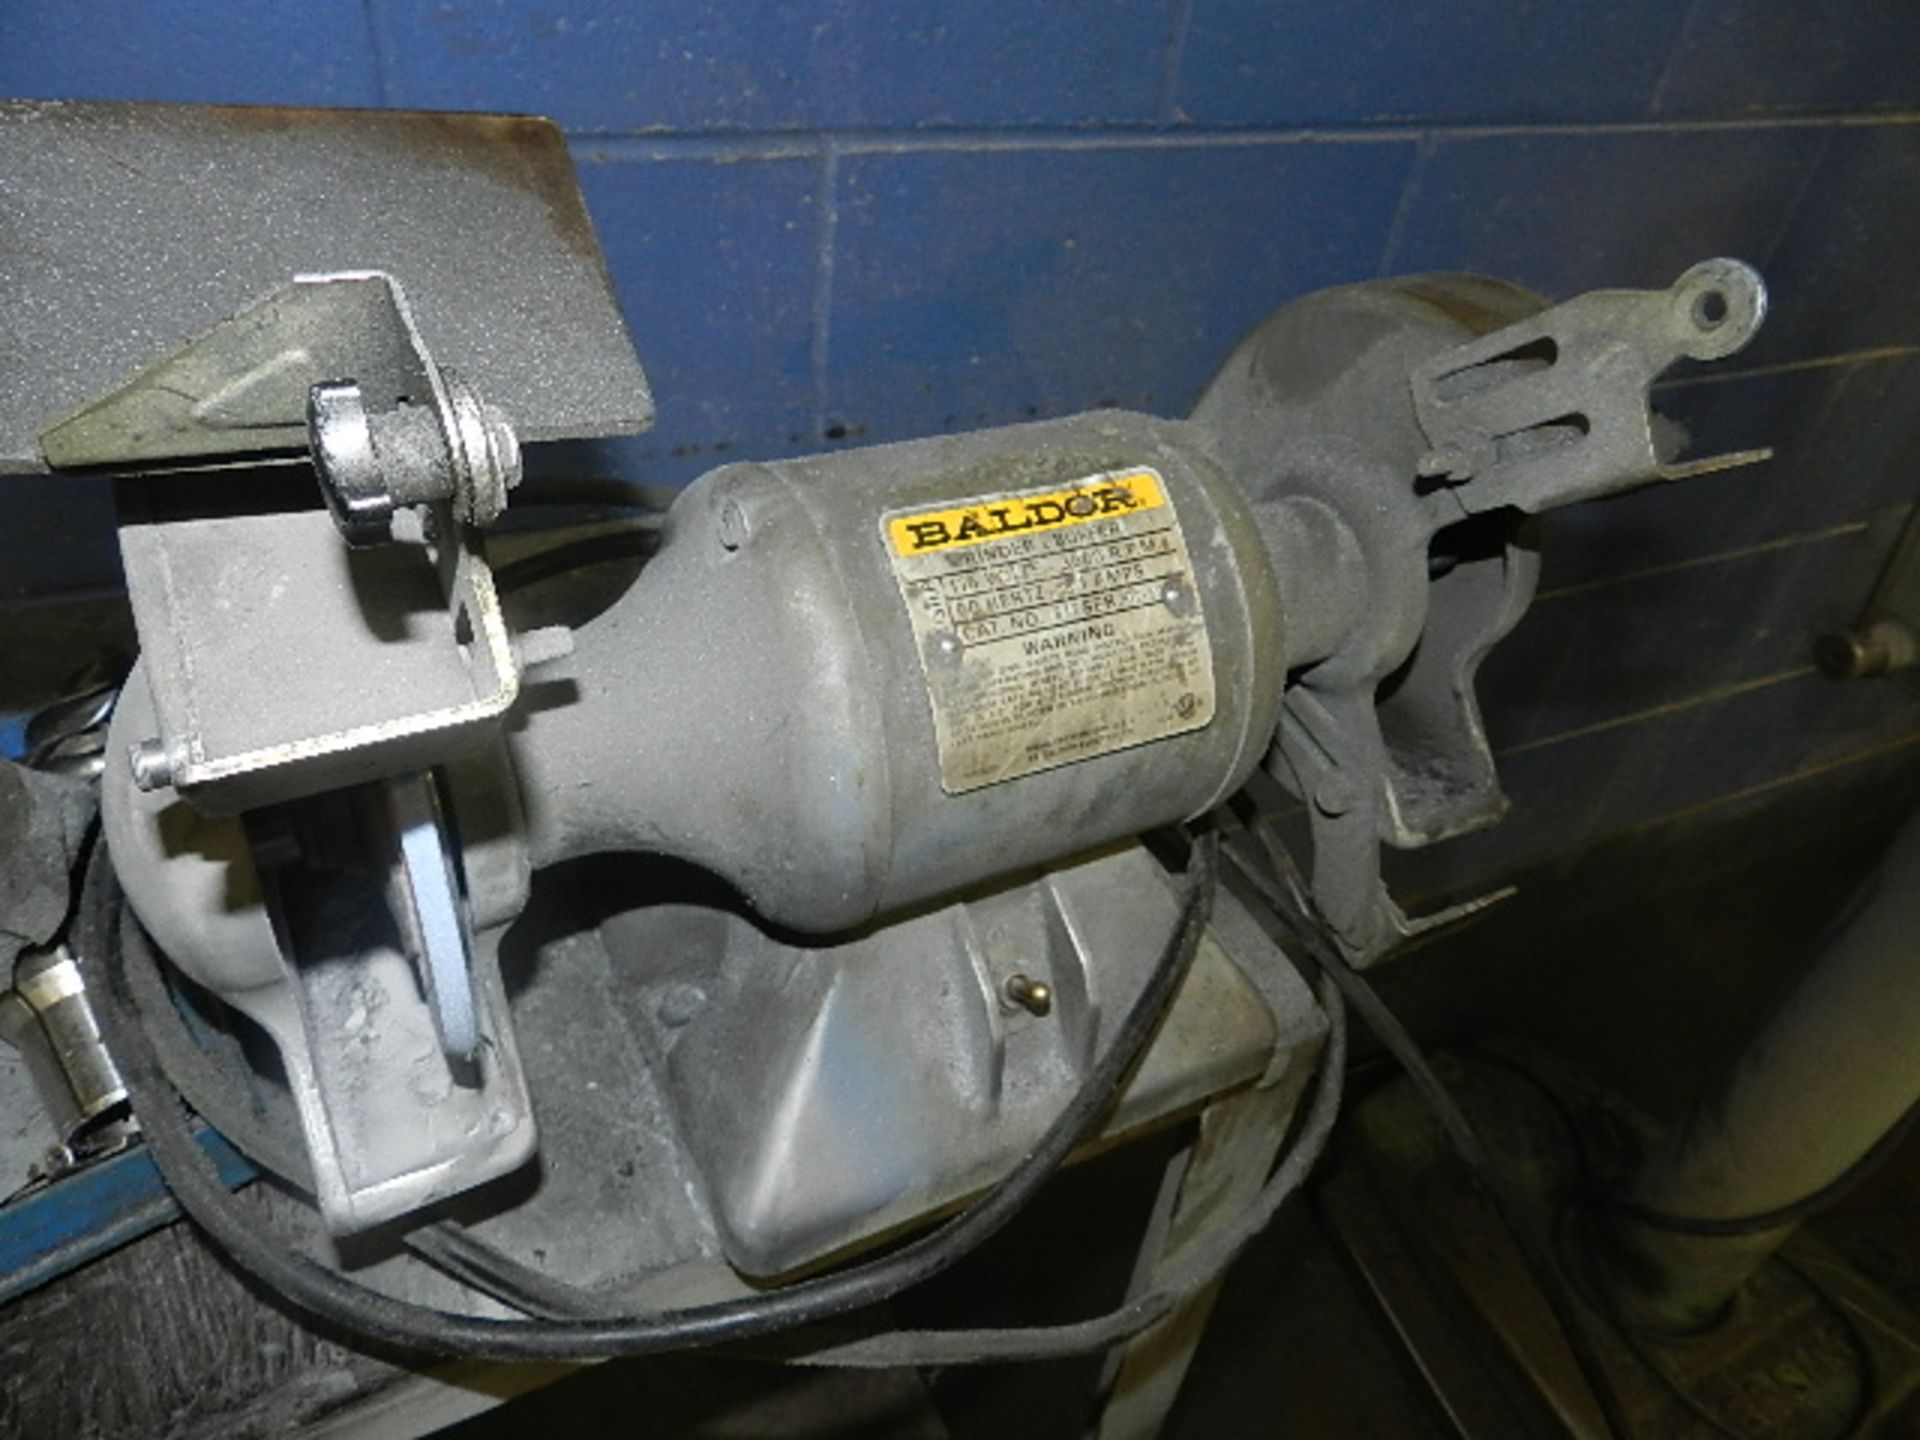 BALDOR GRINDER/BUFFER, 115 VOLT, 1/3 HP, INCLUDES SMALL STAND (A) - Image 2 of 3